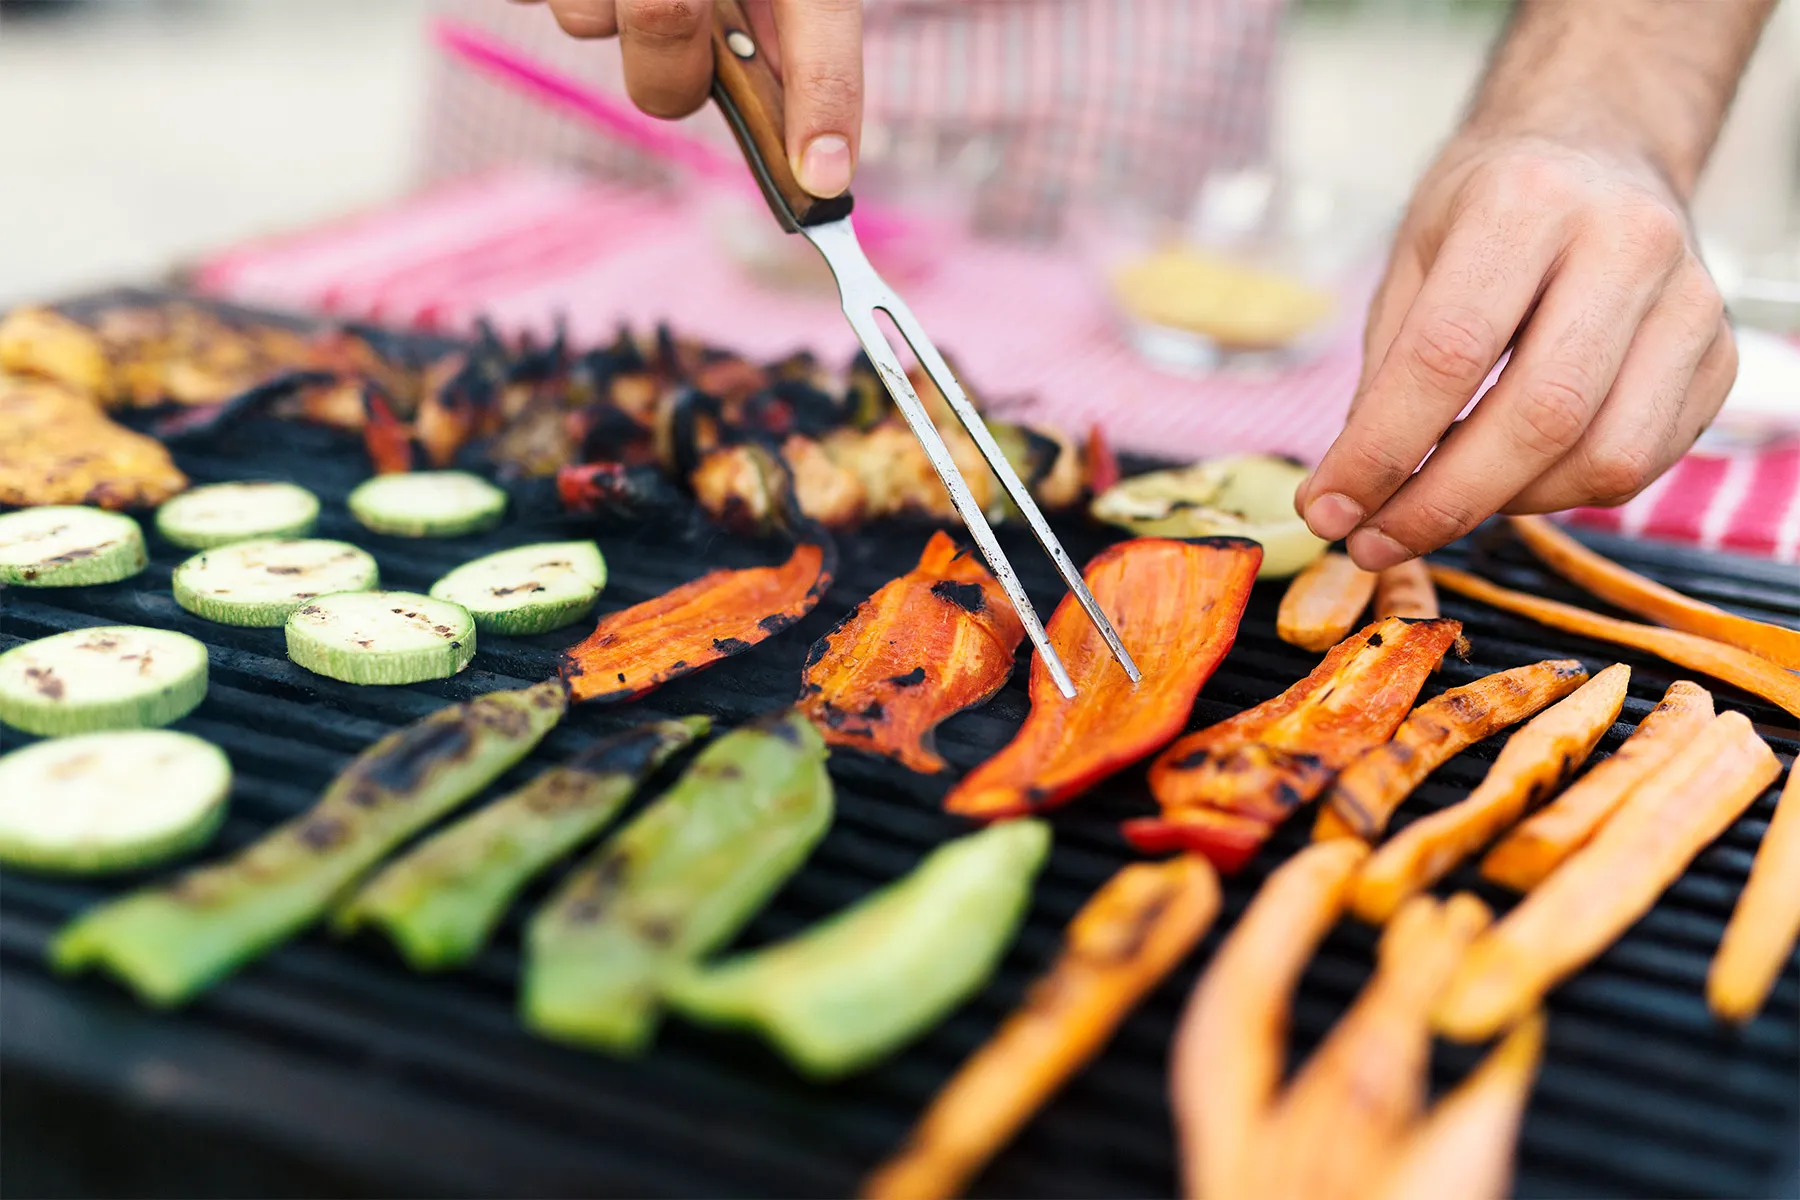 Toxins From Grilling, Smoking & Automotive Exhaust May Increase Odds for RA